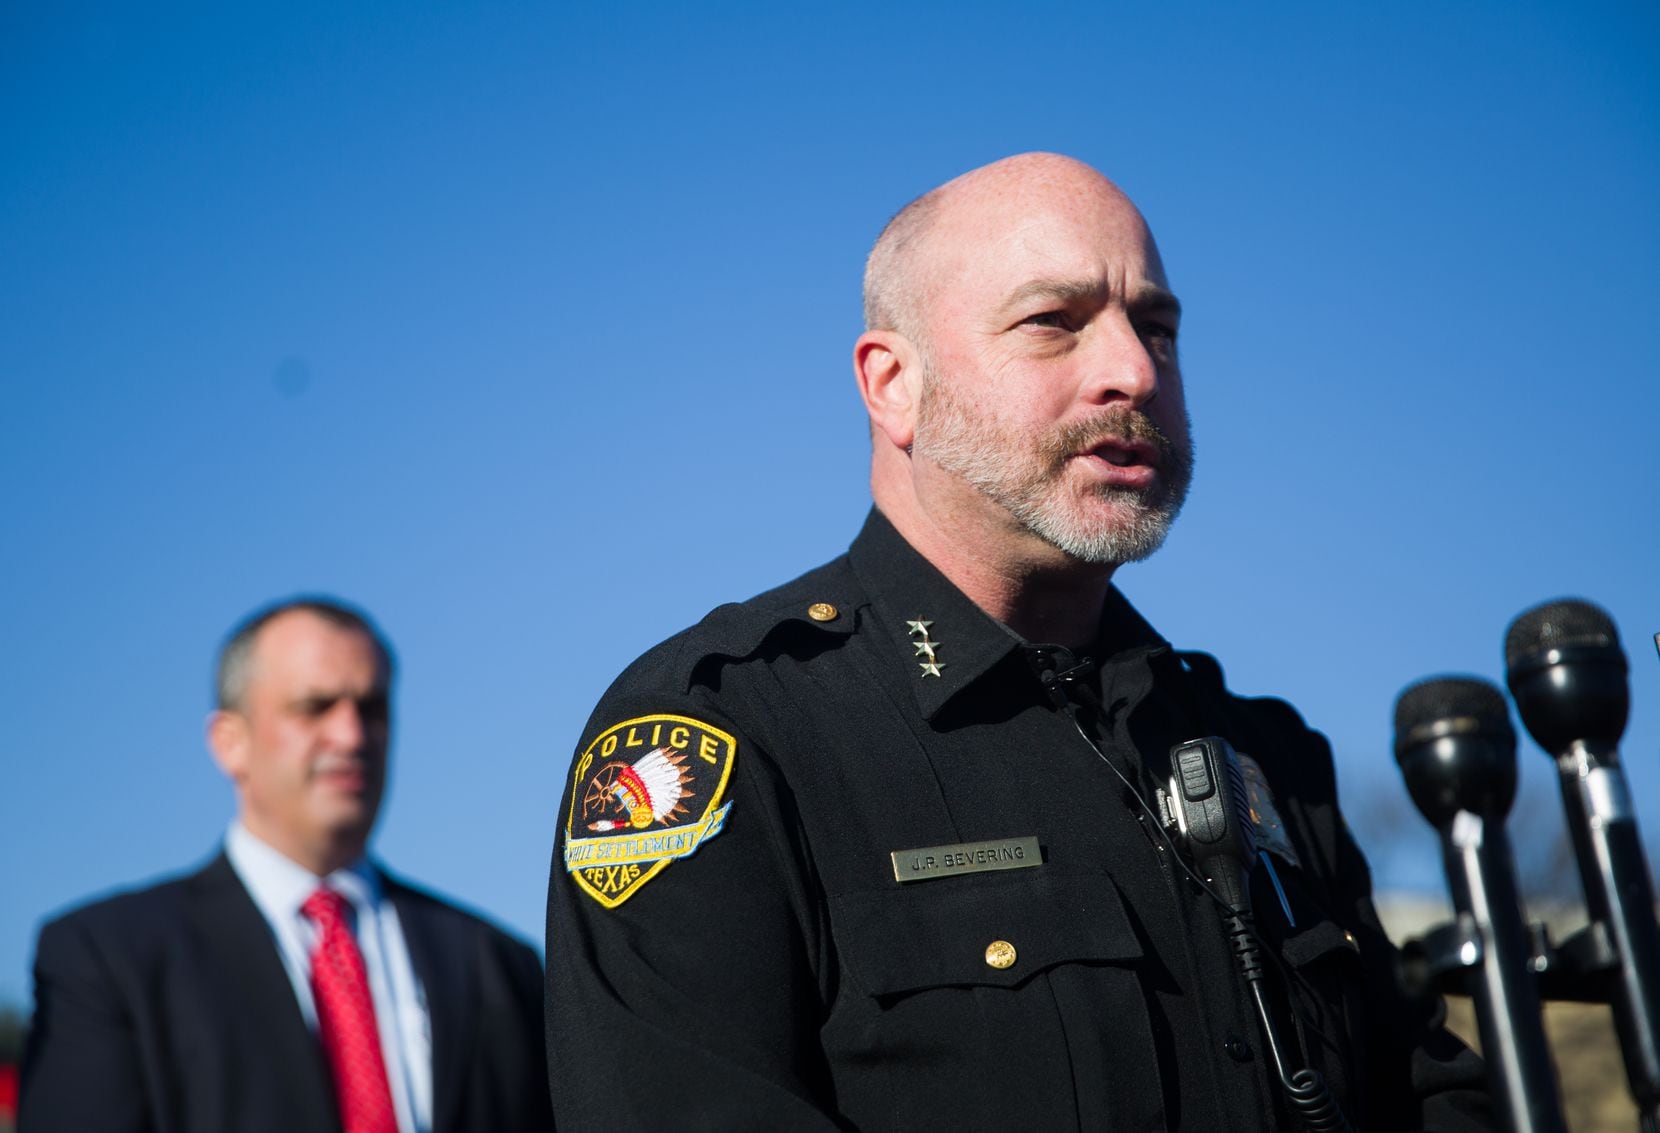 White Settlement police Chief J.P. Bevering speaks at a news conference following the...